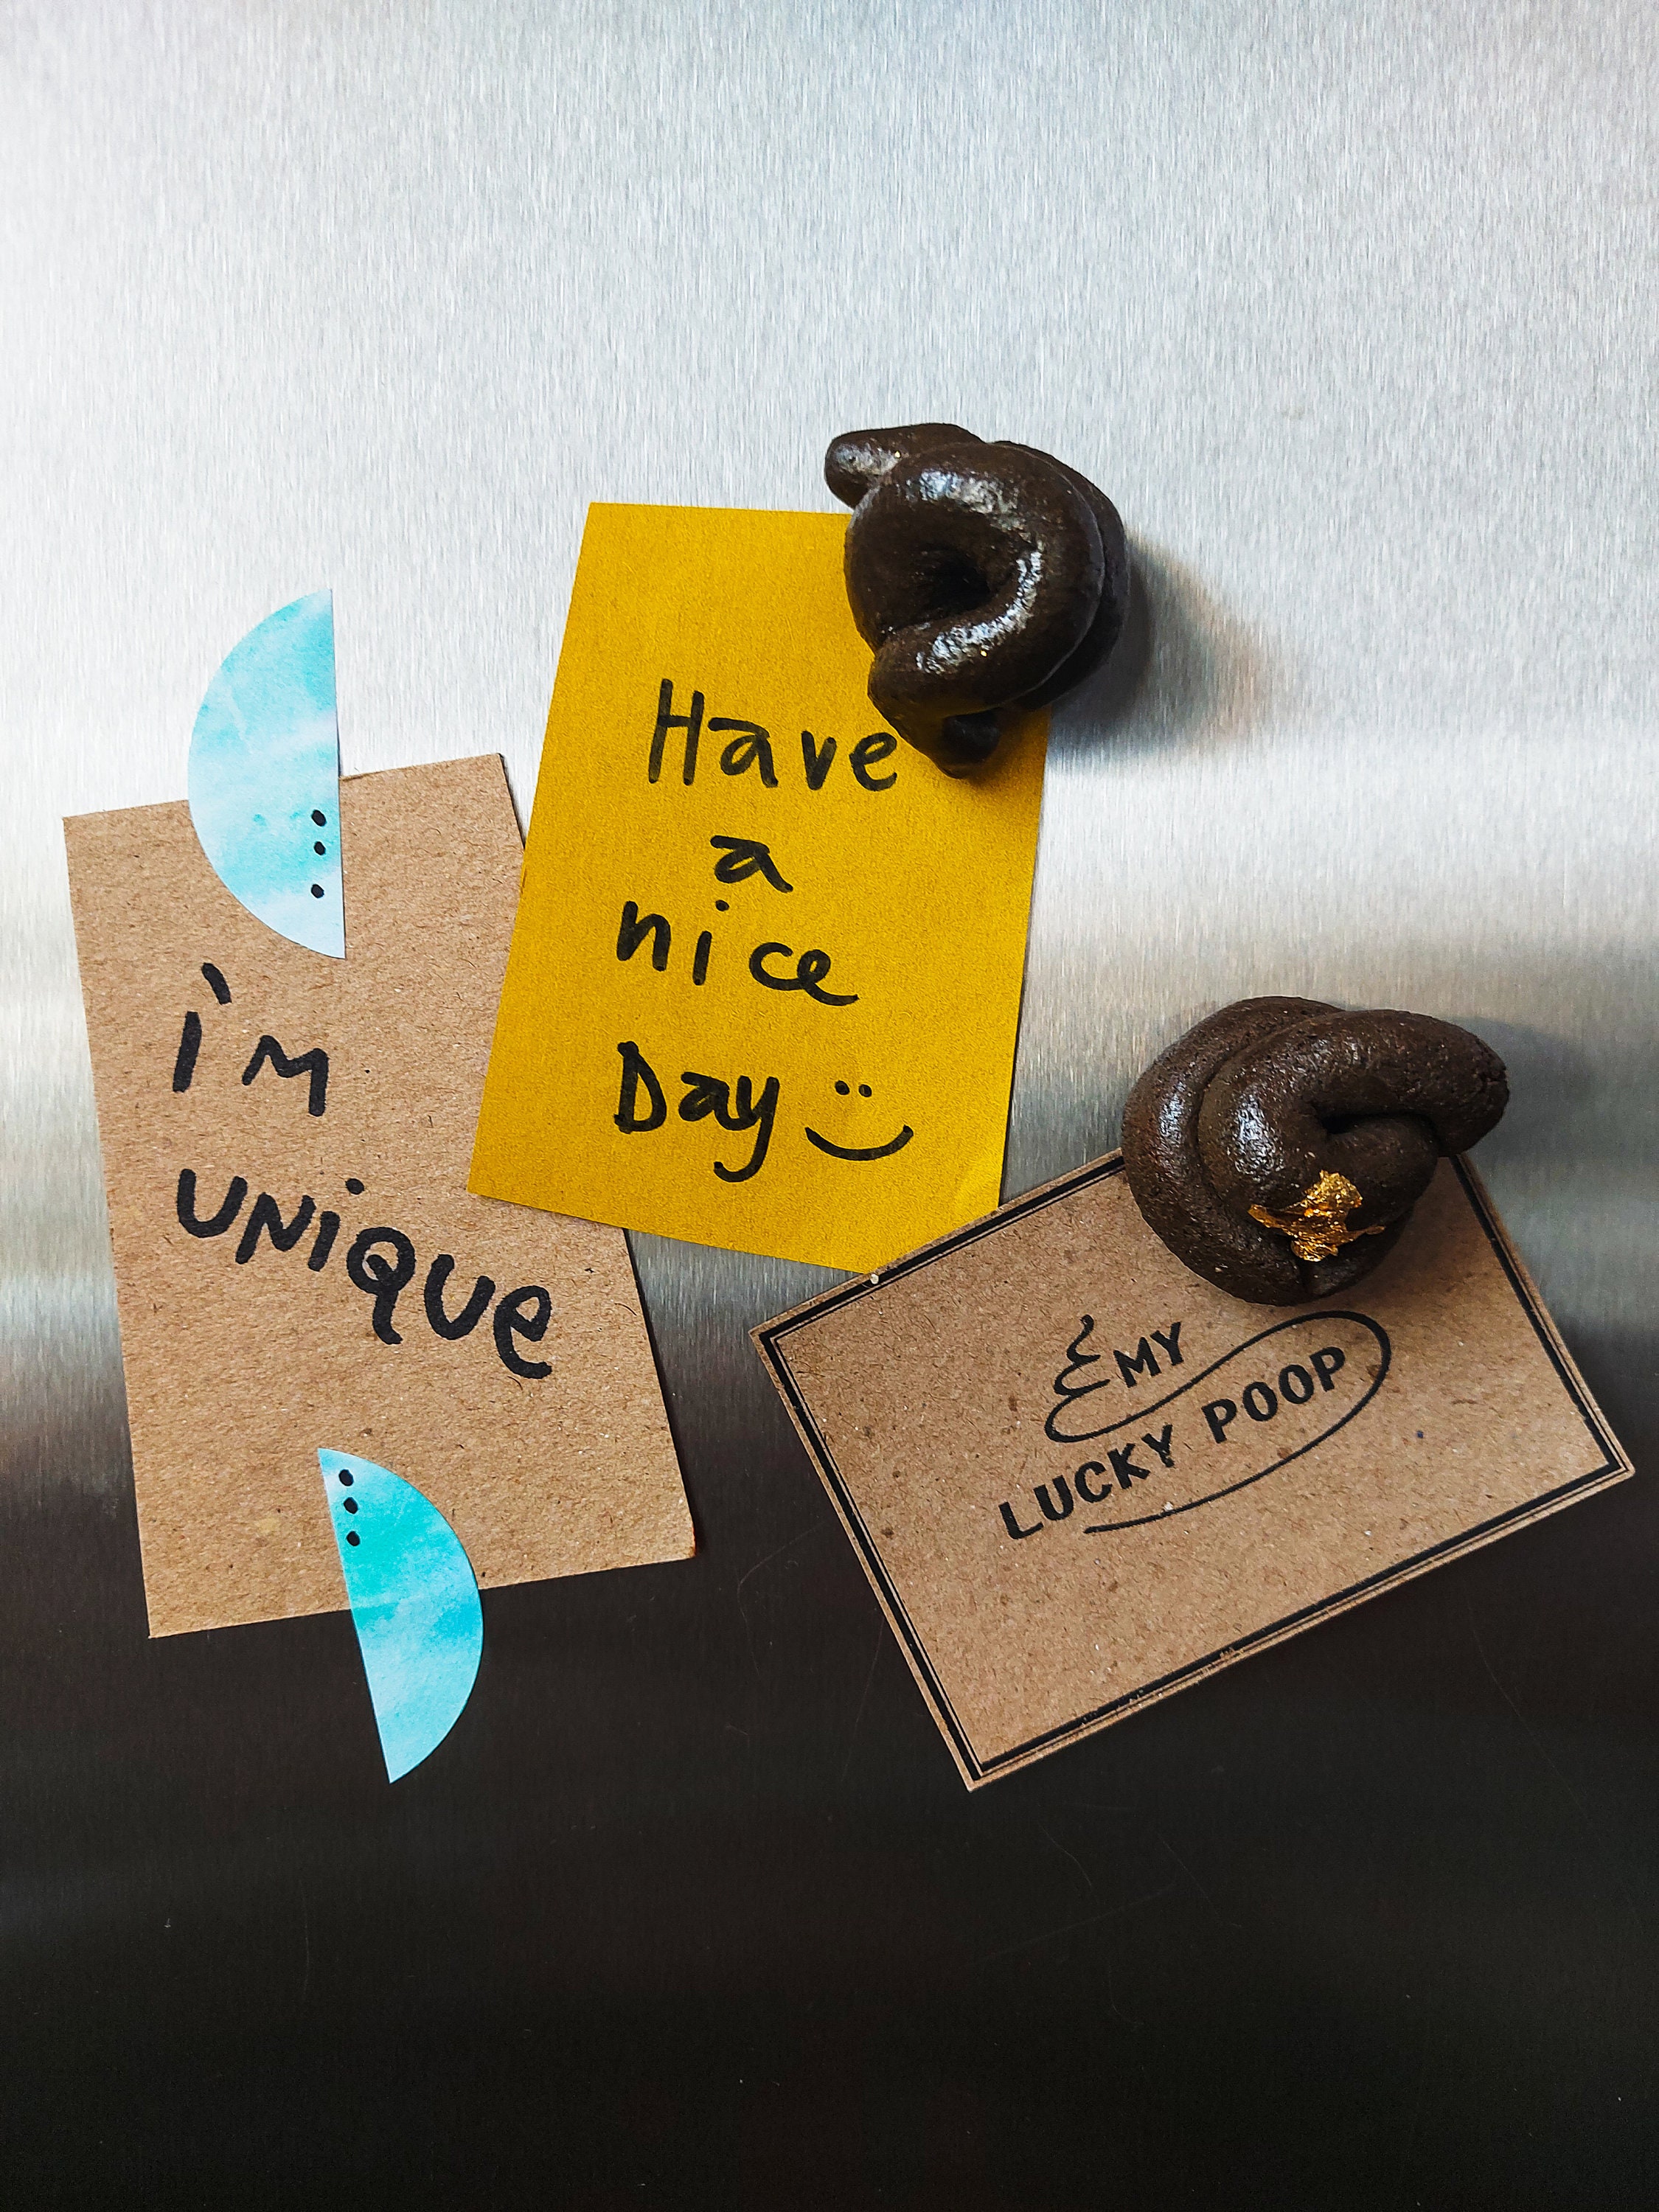 Real poop magnet brings good luck happy lucky poop must have funny fun gift for happiness for you and best friends unique and homemade